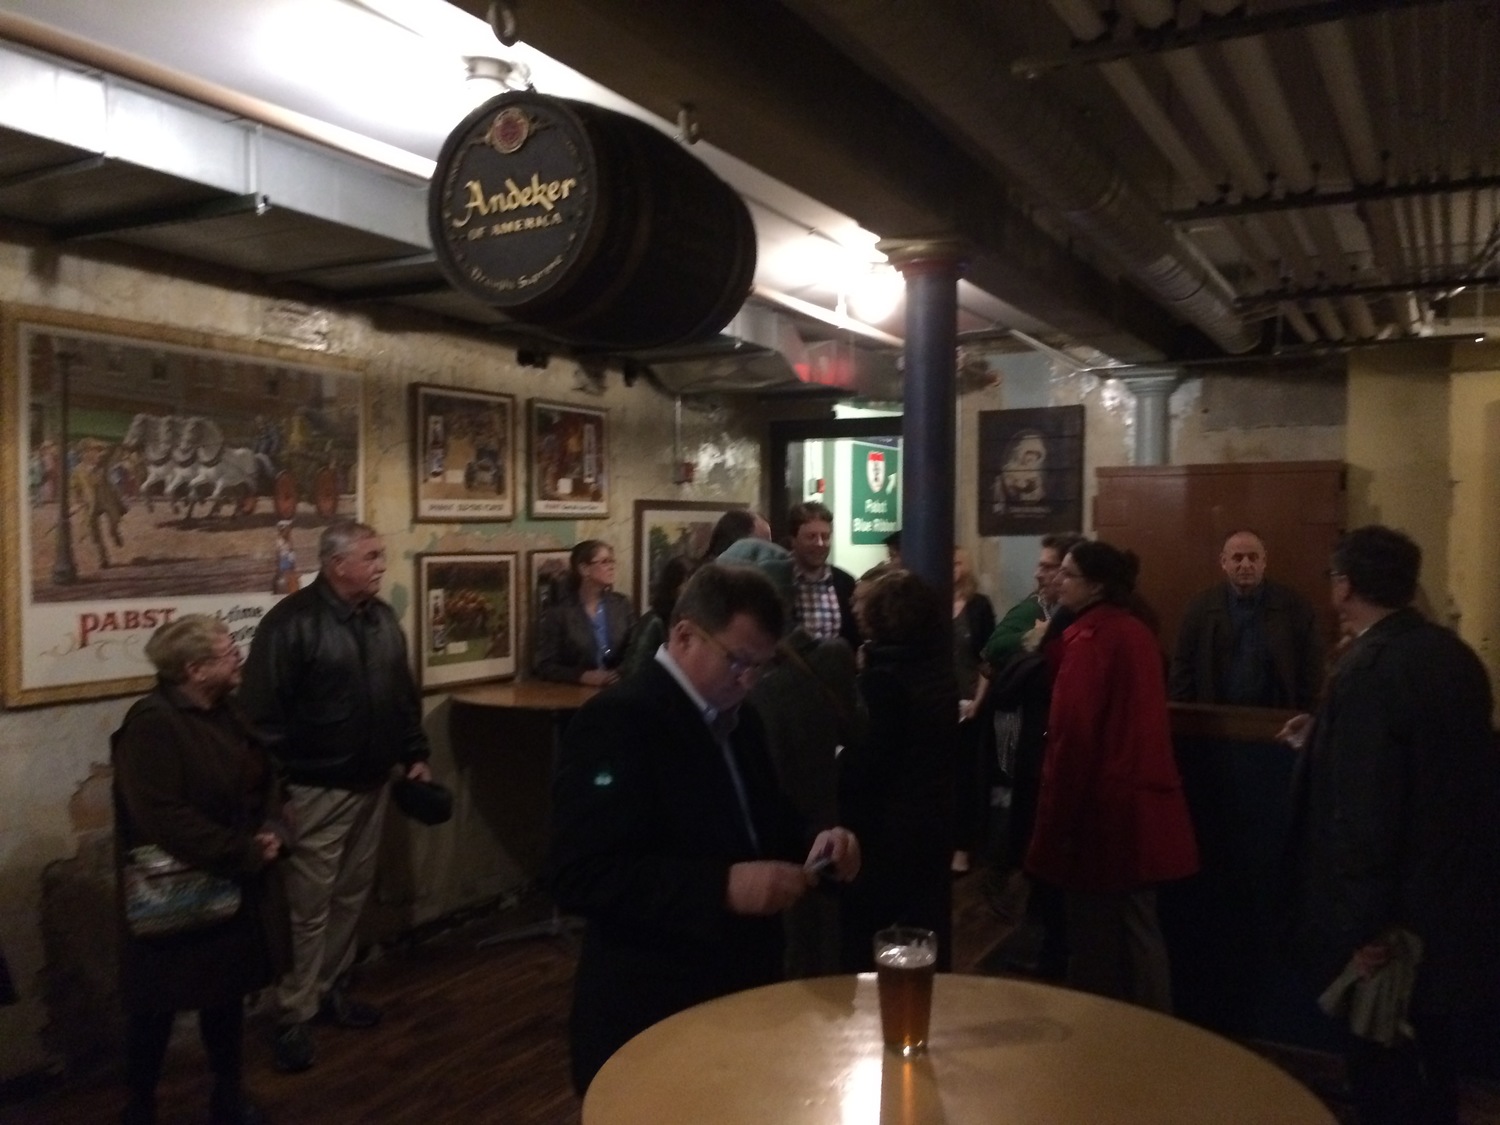 WTHP+at+Best+Place,+Historic+Pabst+Brewery,+MKW+-+2015,+Nov17+I.jpeg